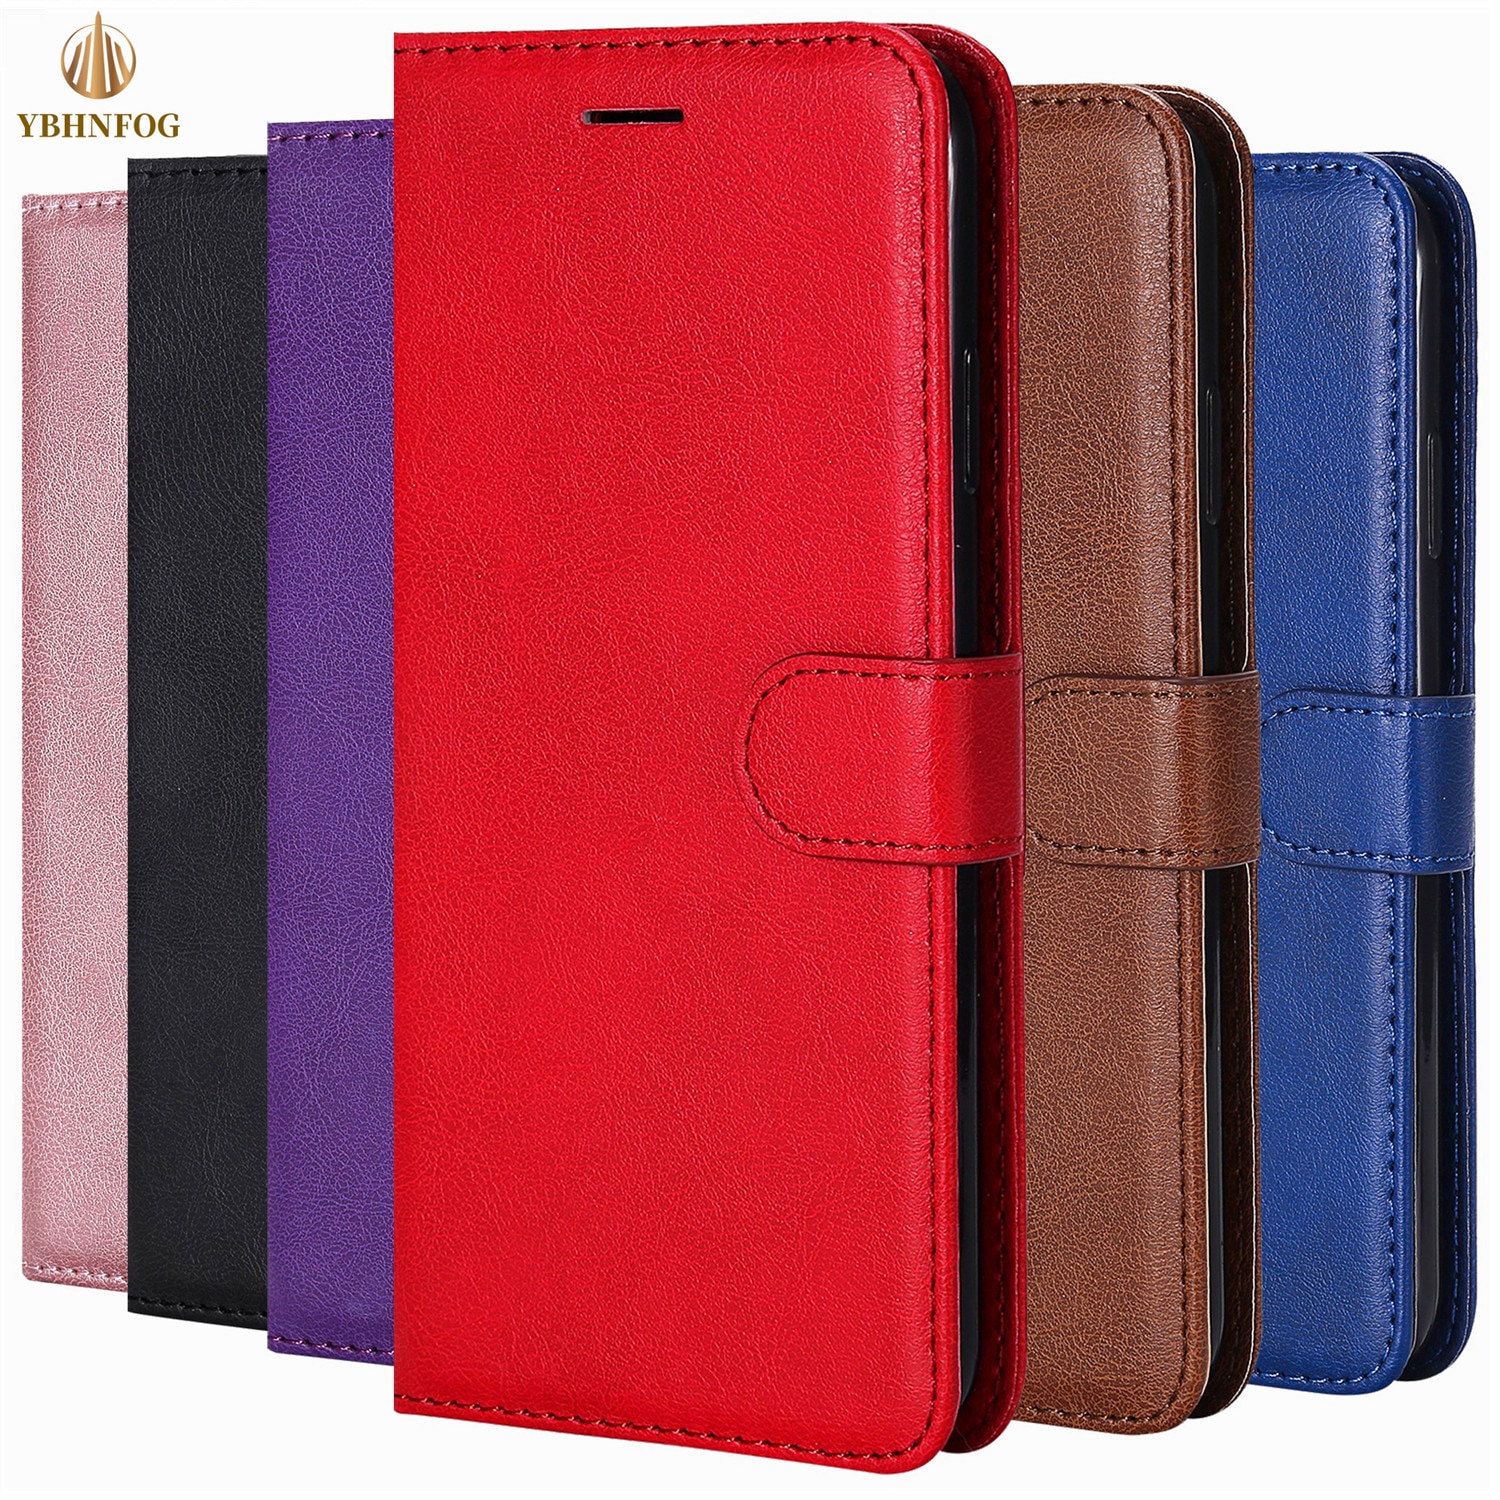 Luxury Leather Wallet Phone Case For Huawei P Smart 2019 2021 P8 P9 Lite 2017 P10 P20 P30 P50 Pro P40 Lite E Flip Stand Cover